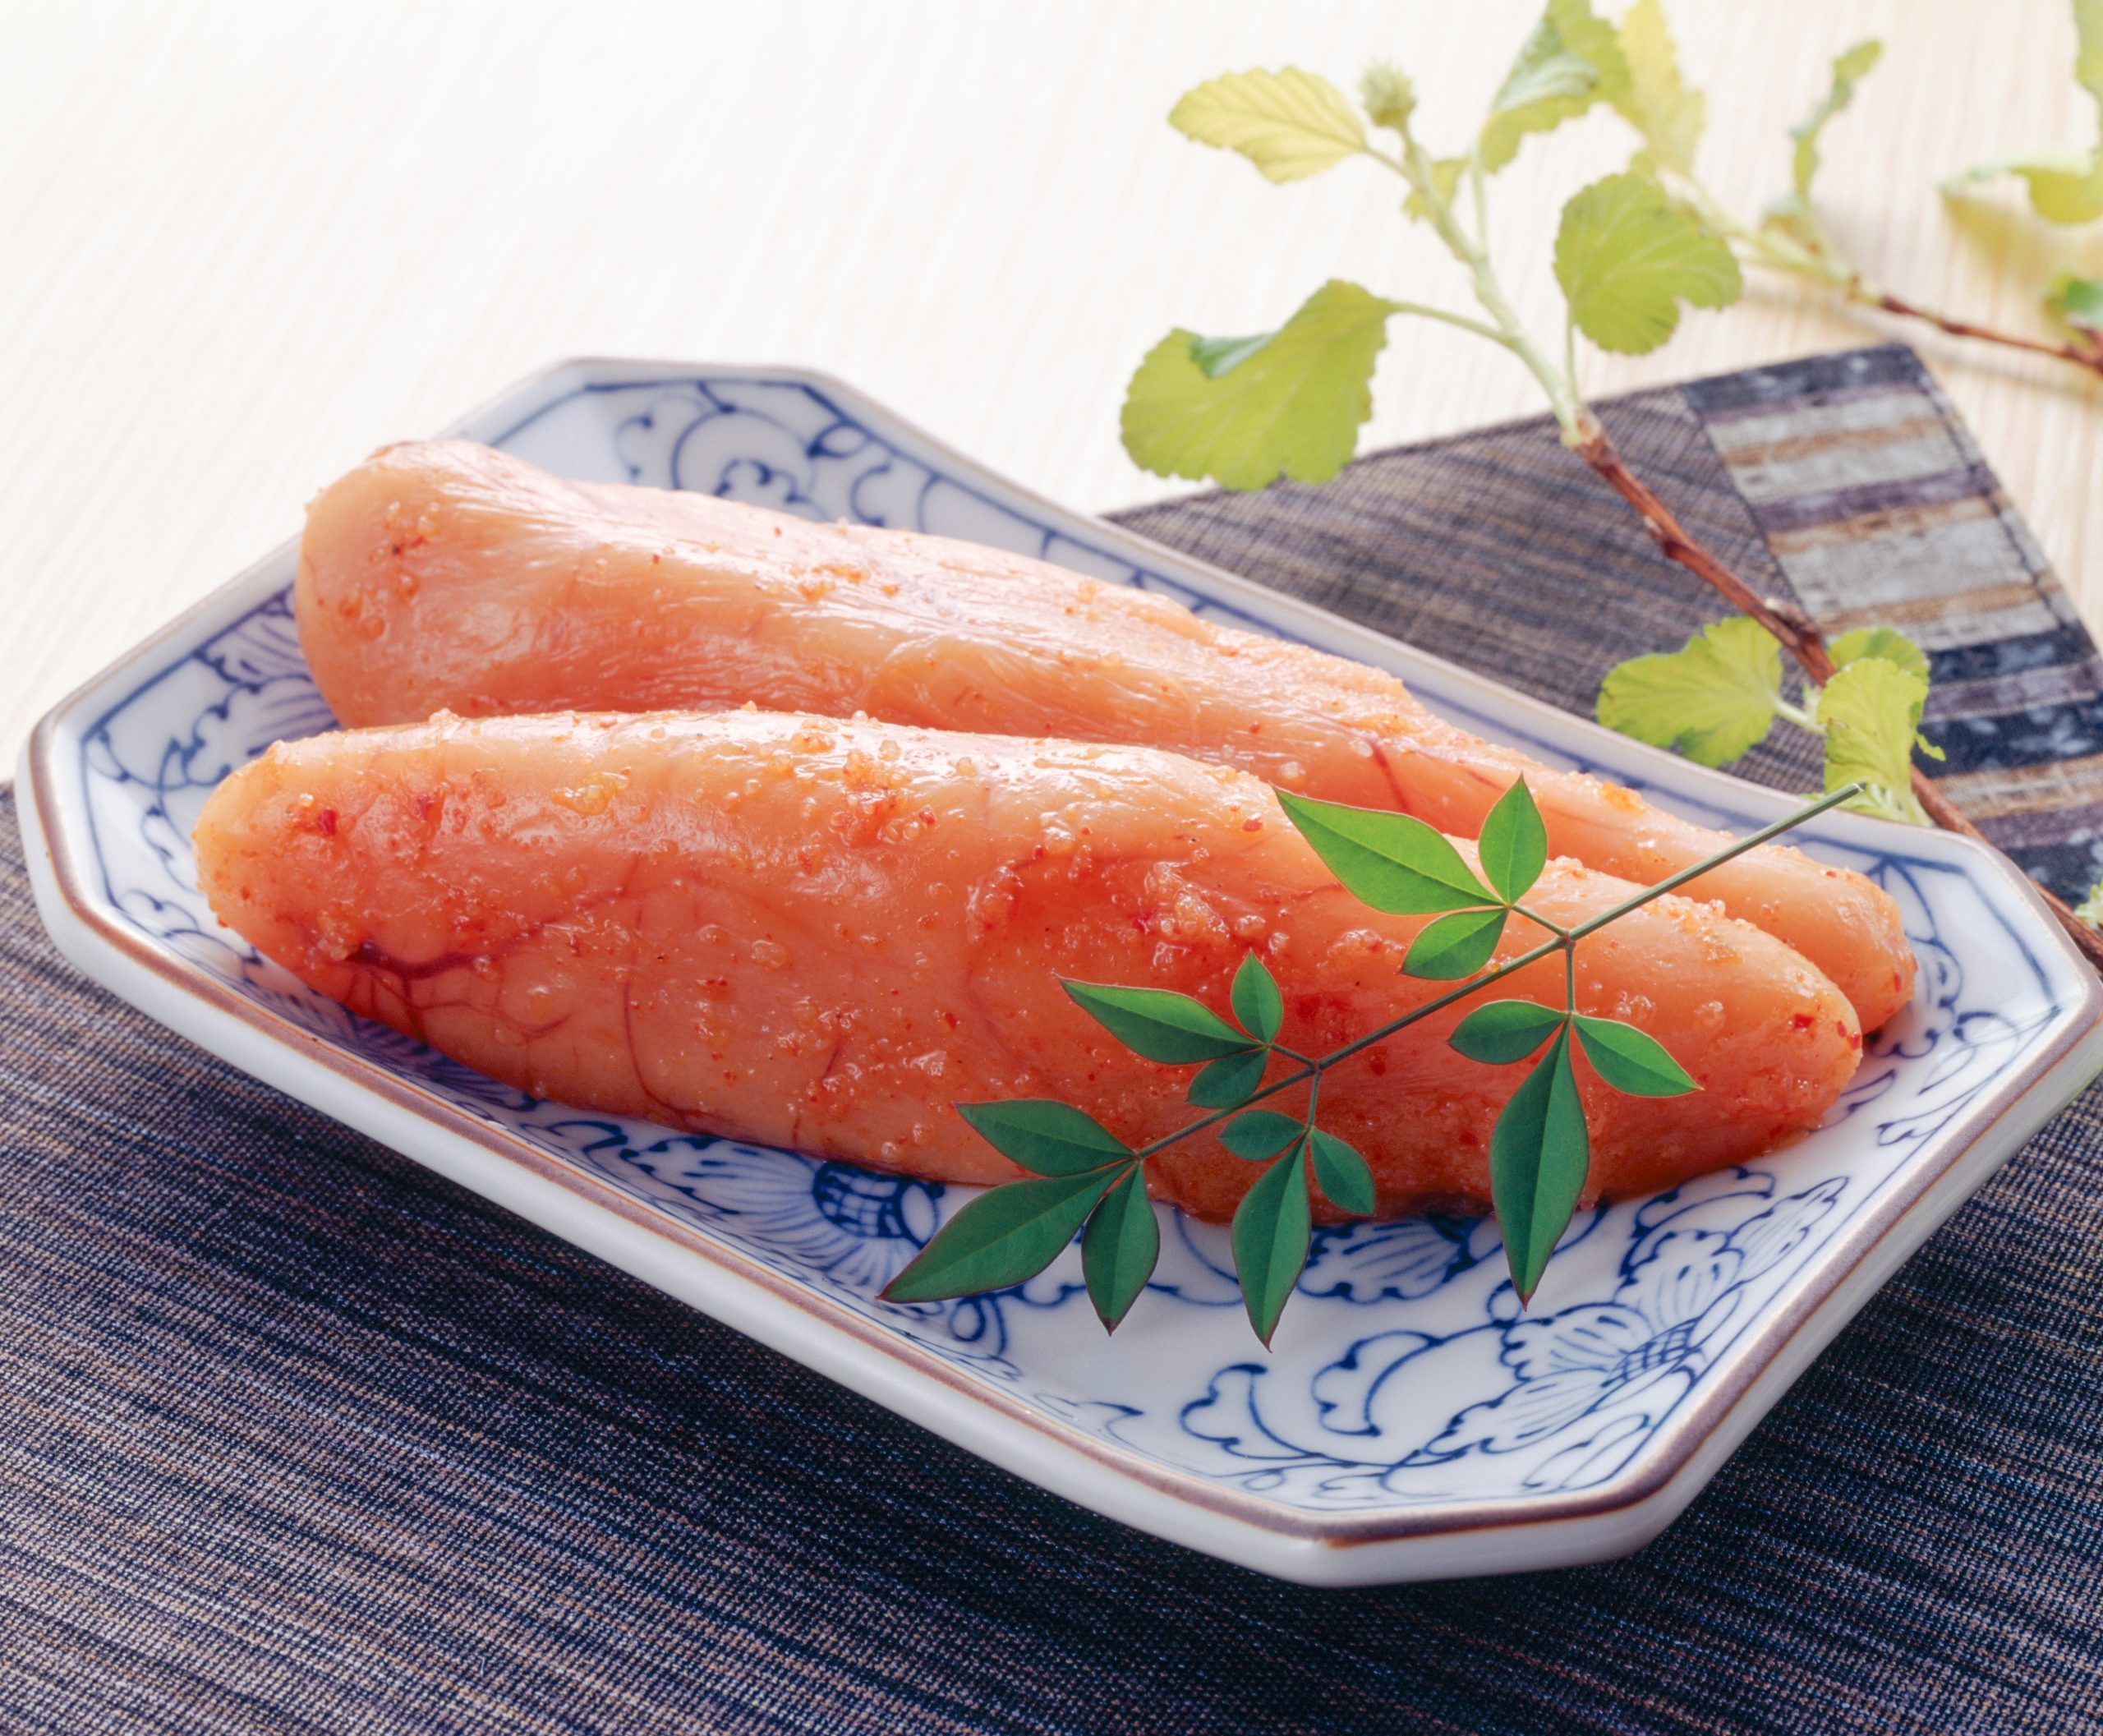 Buy Cod Roe 600-700g Online at the Best Price, Free UK Delivery